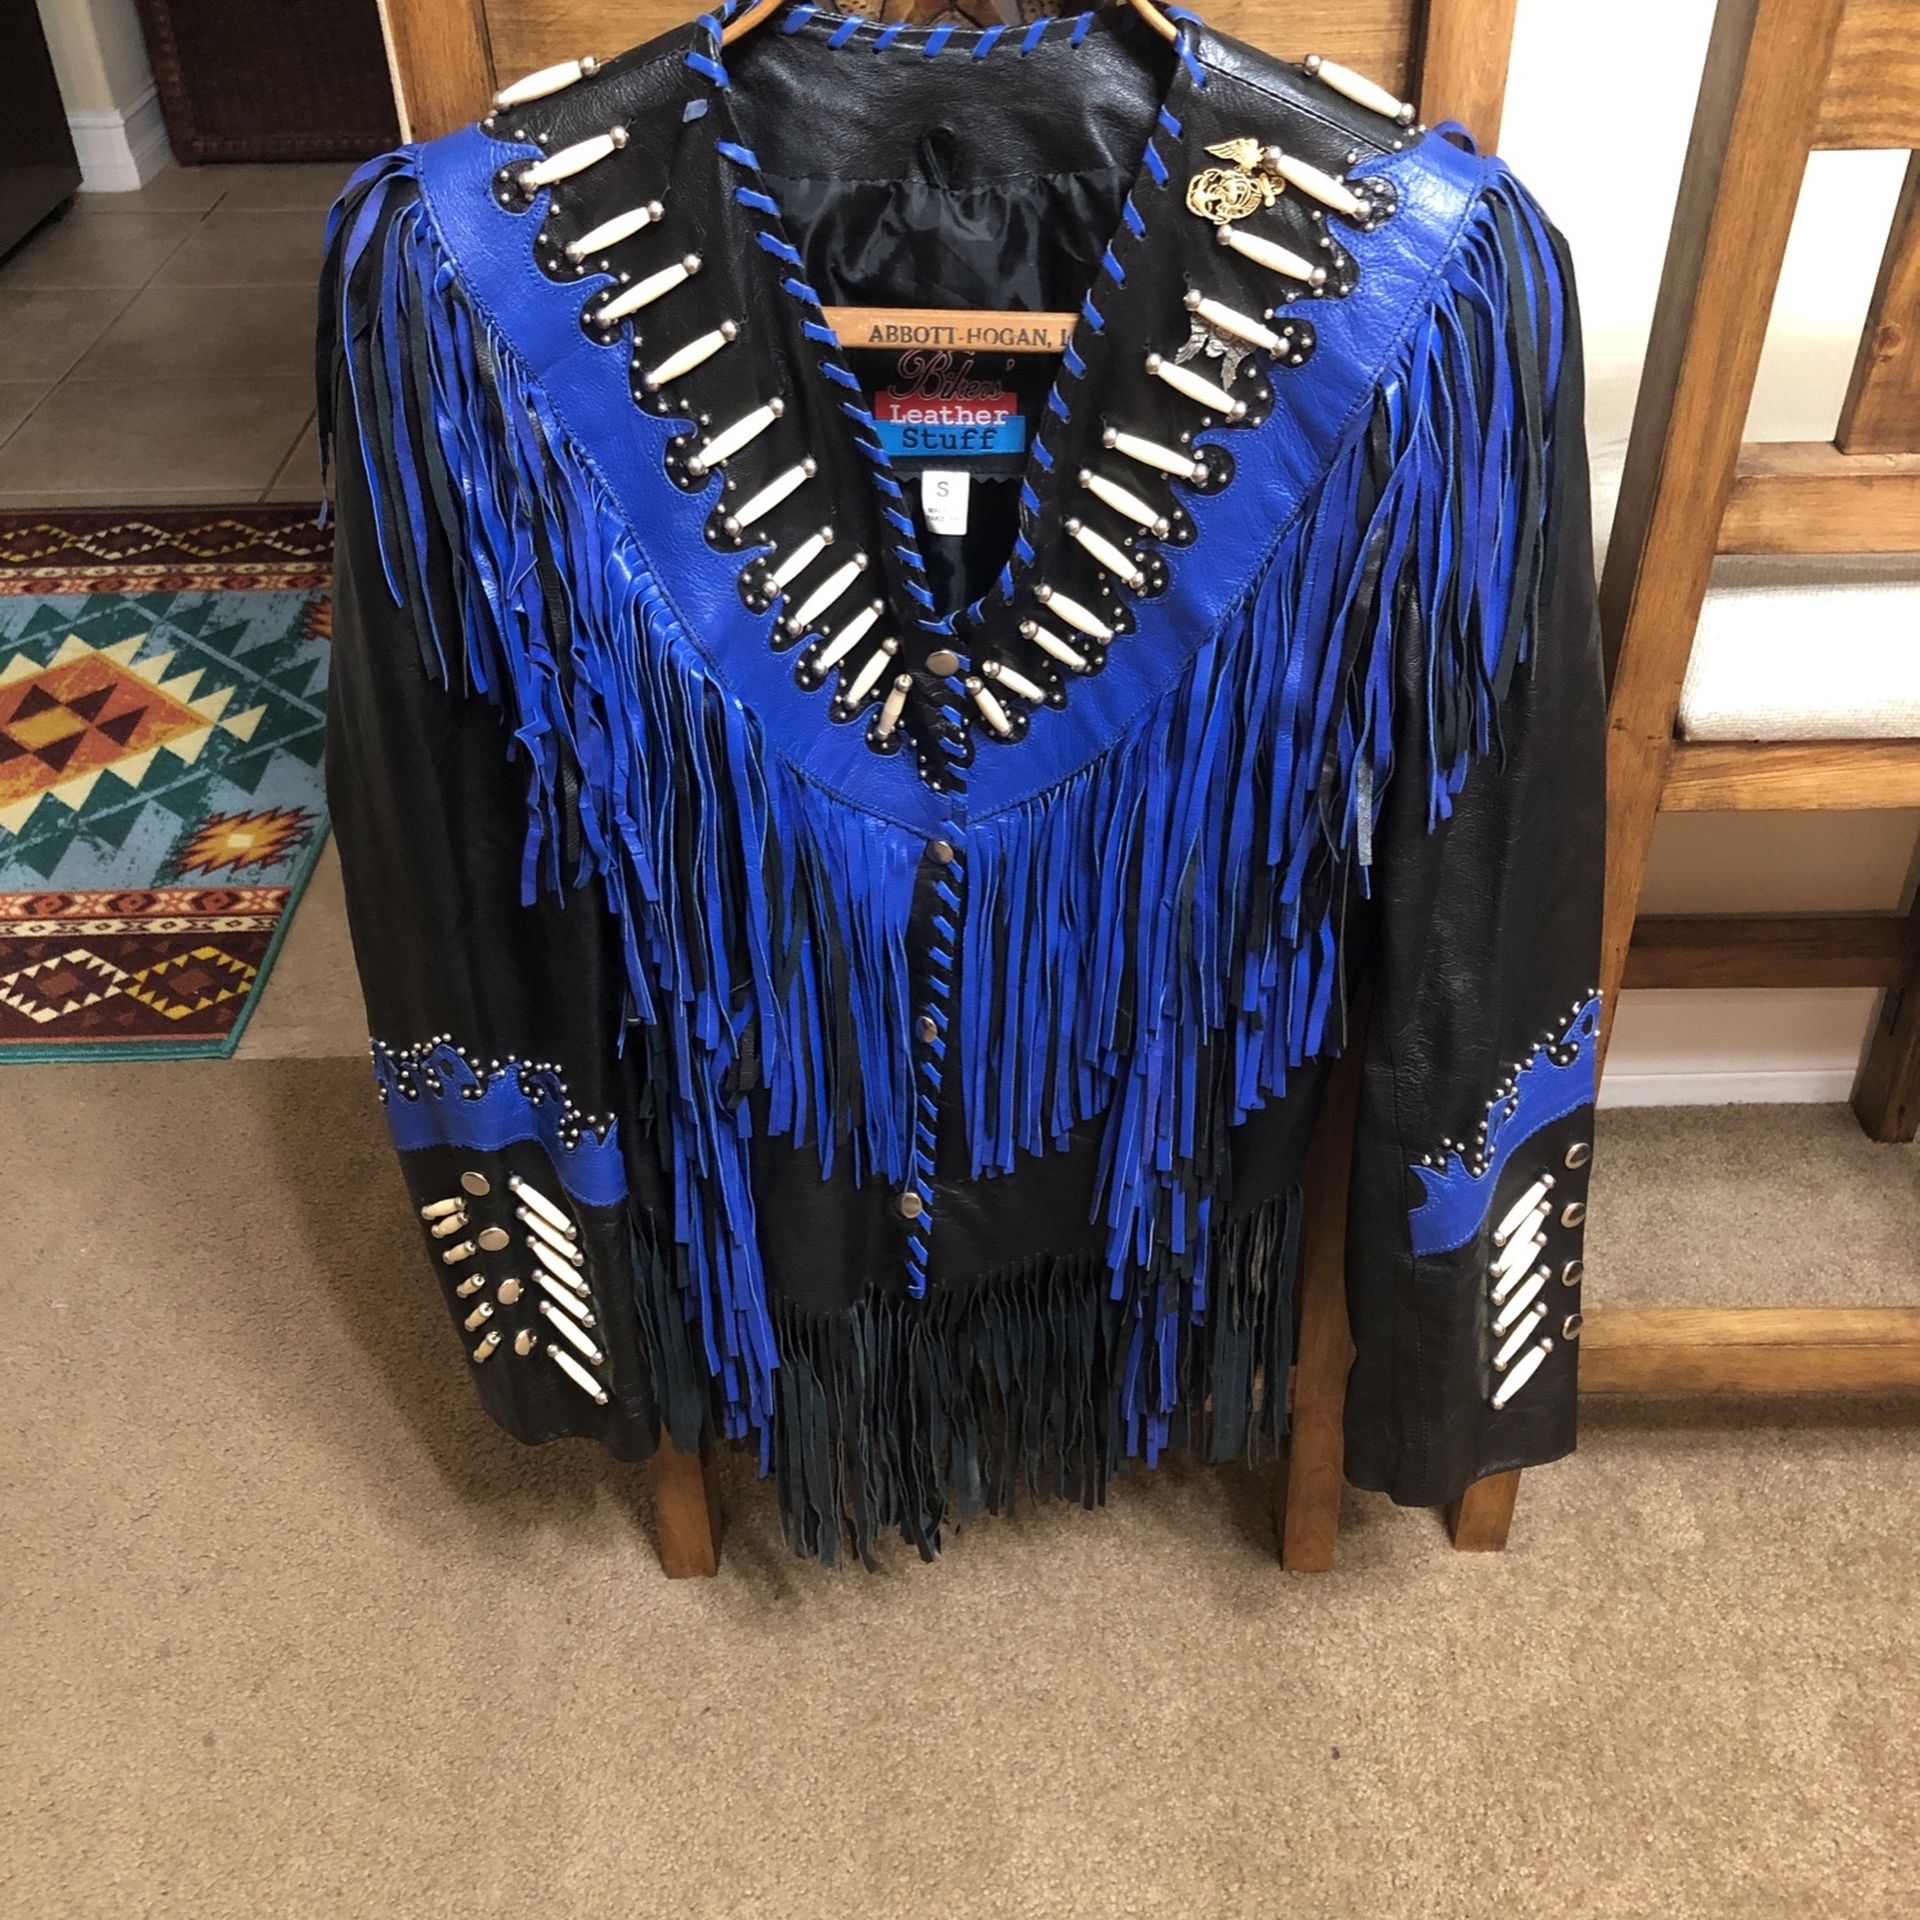 Beautiful Leather Jacket Black With Blue Fringes . Wore Once , Size Small